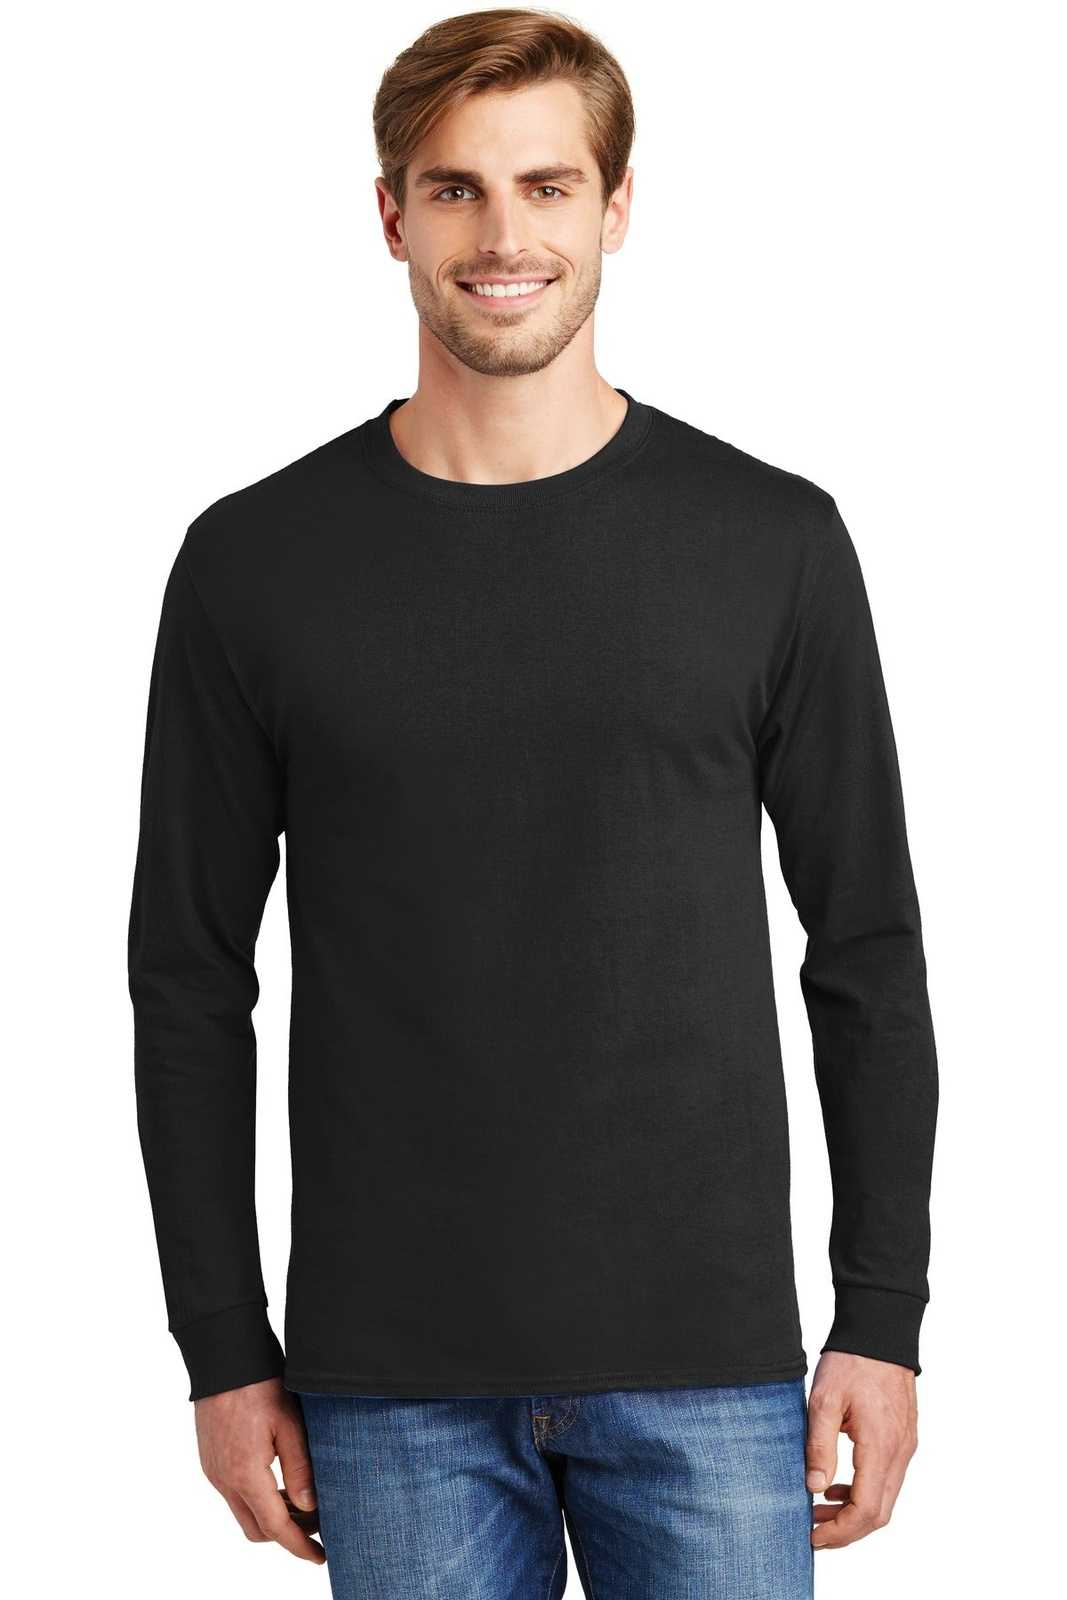 Hanes 5586 Tagless 100% Cotton Long Sleeve T-Shirt - Black - HIT a Double